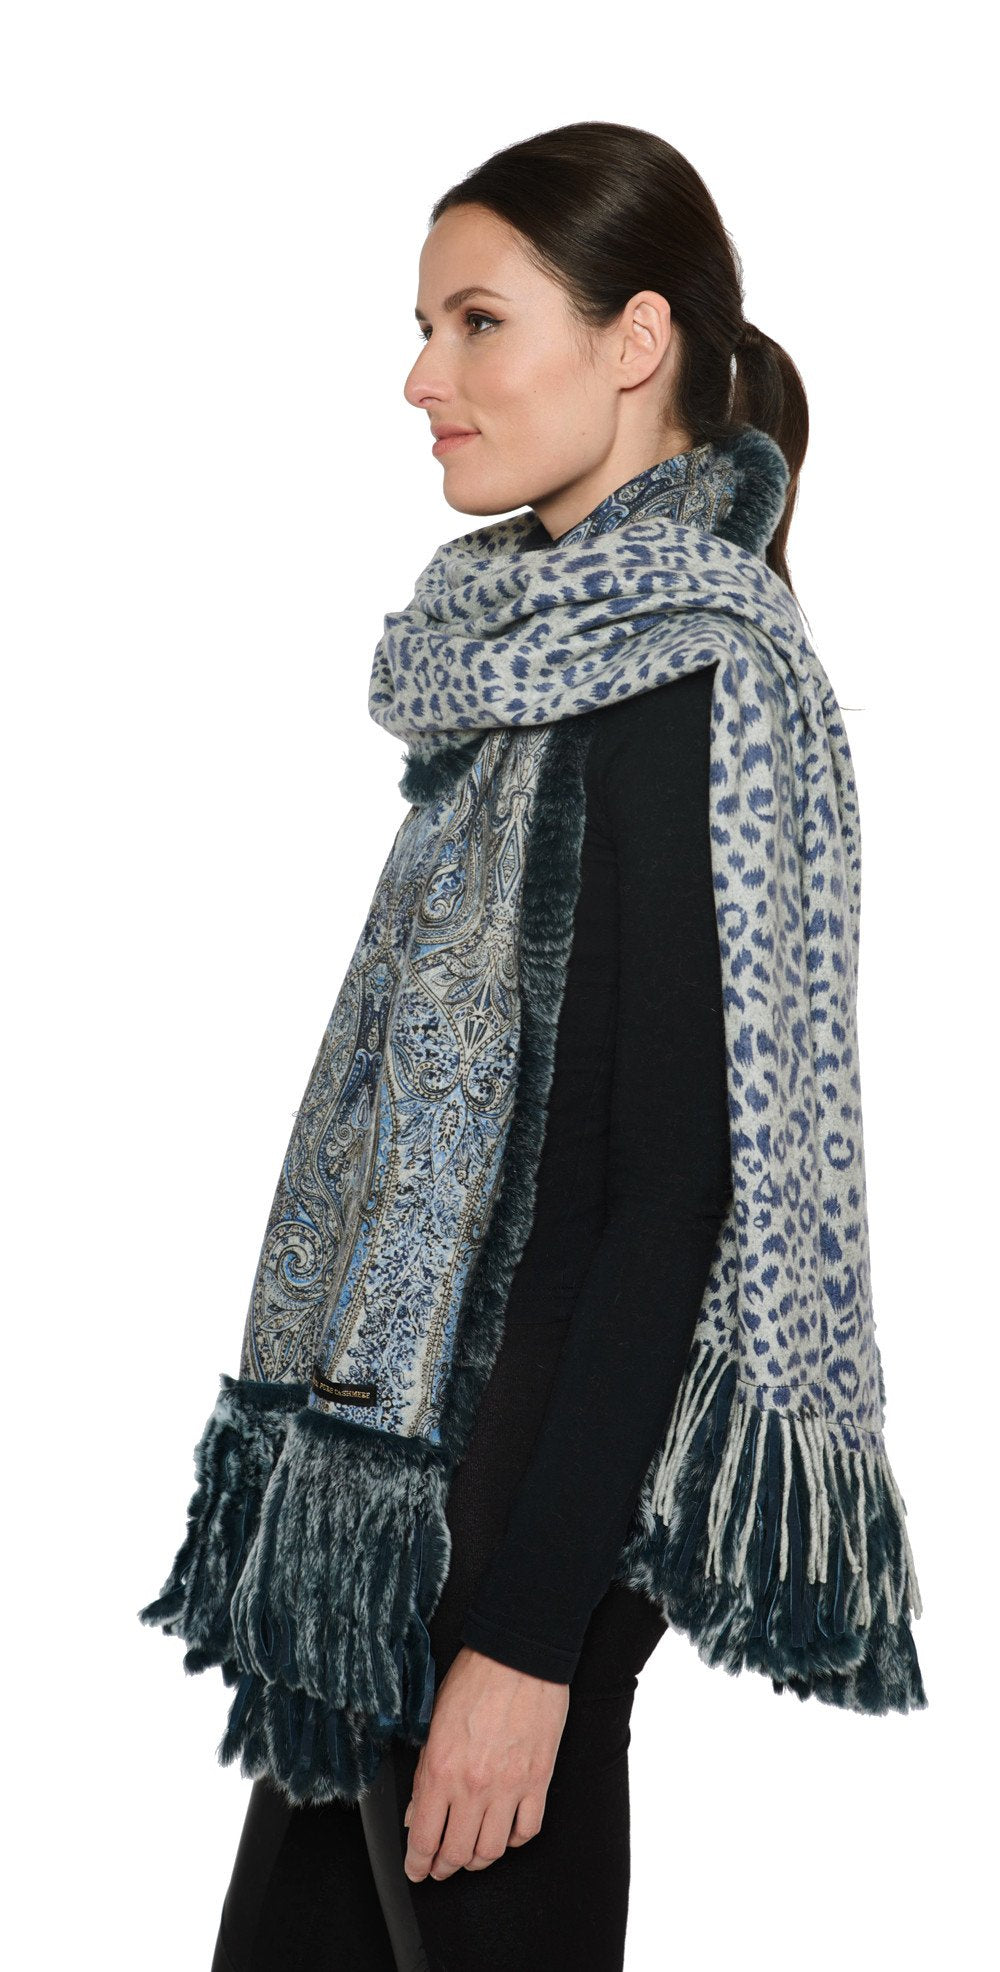 THE SALFORD Cashmere Reversible Printed Wrap with Rex Rabbit Fringe - paulamariecollection